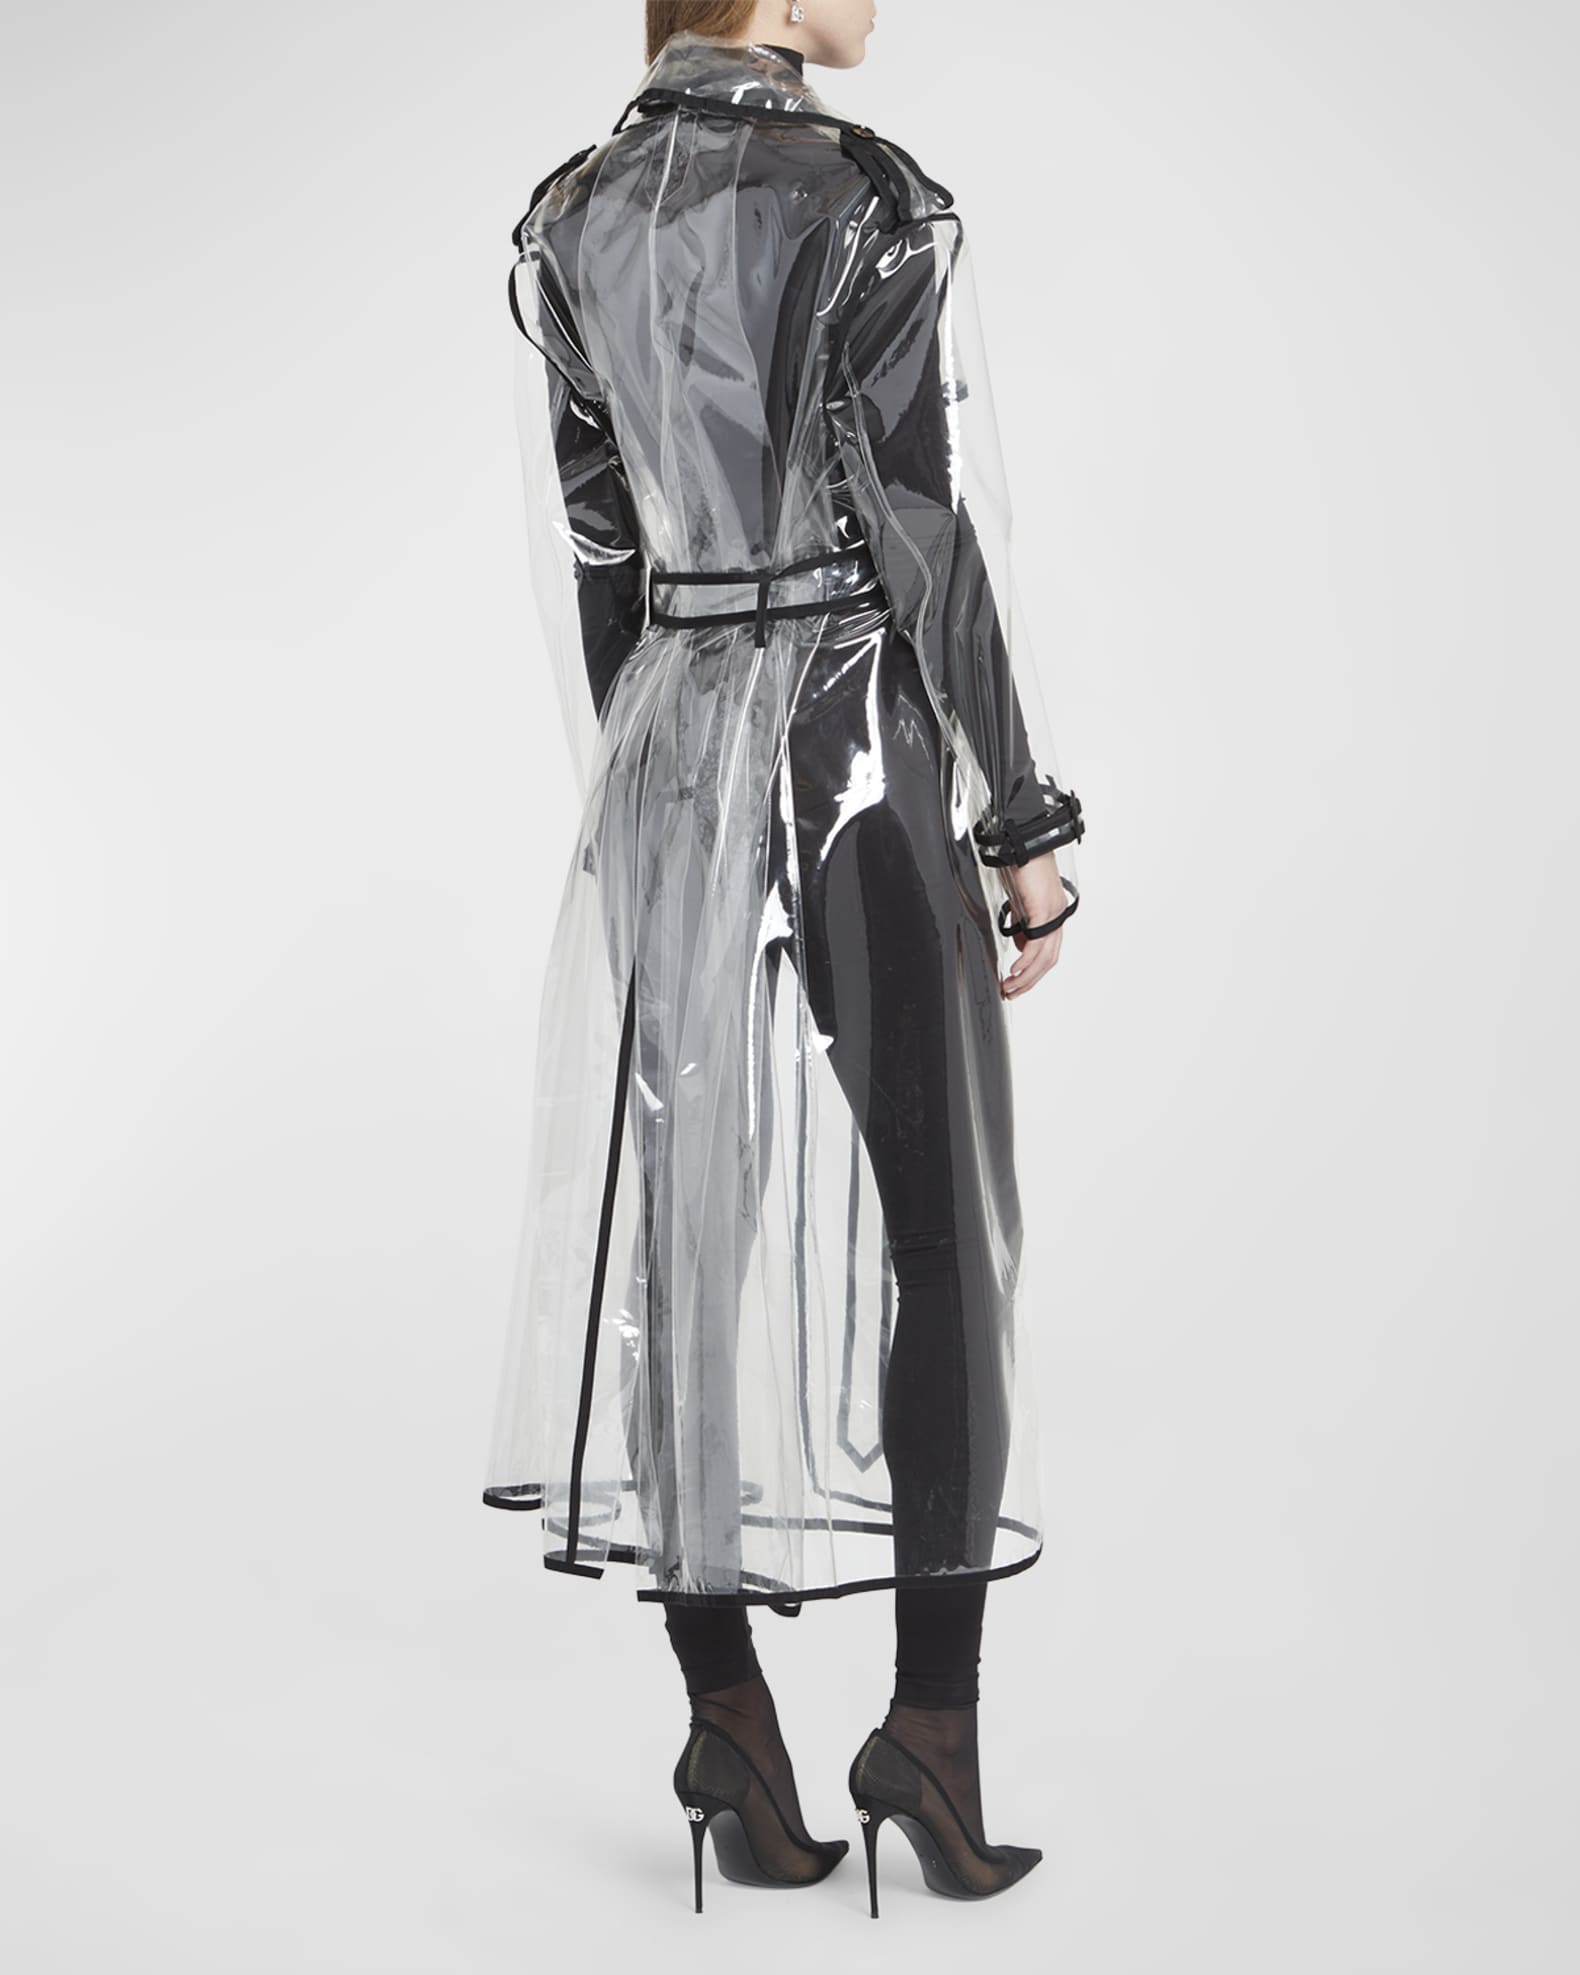 Dolce&Gabbana Light PVC Double-Breasted Trench Coat | Neiman Marcus